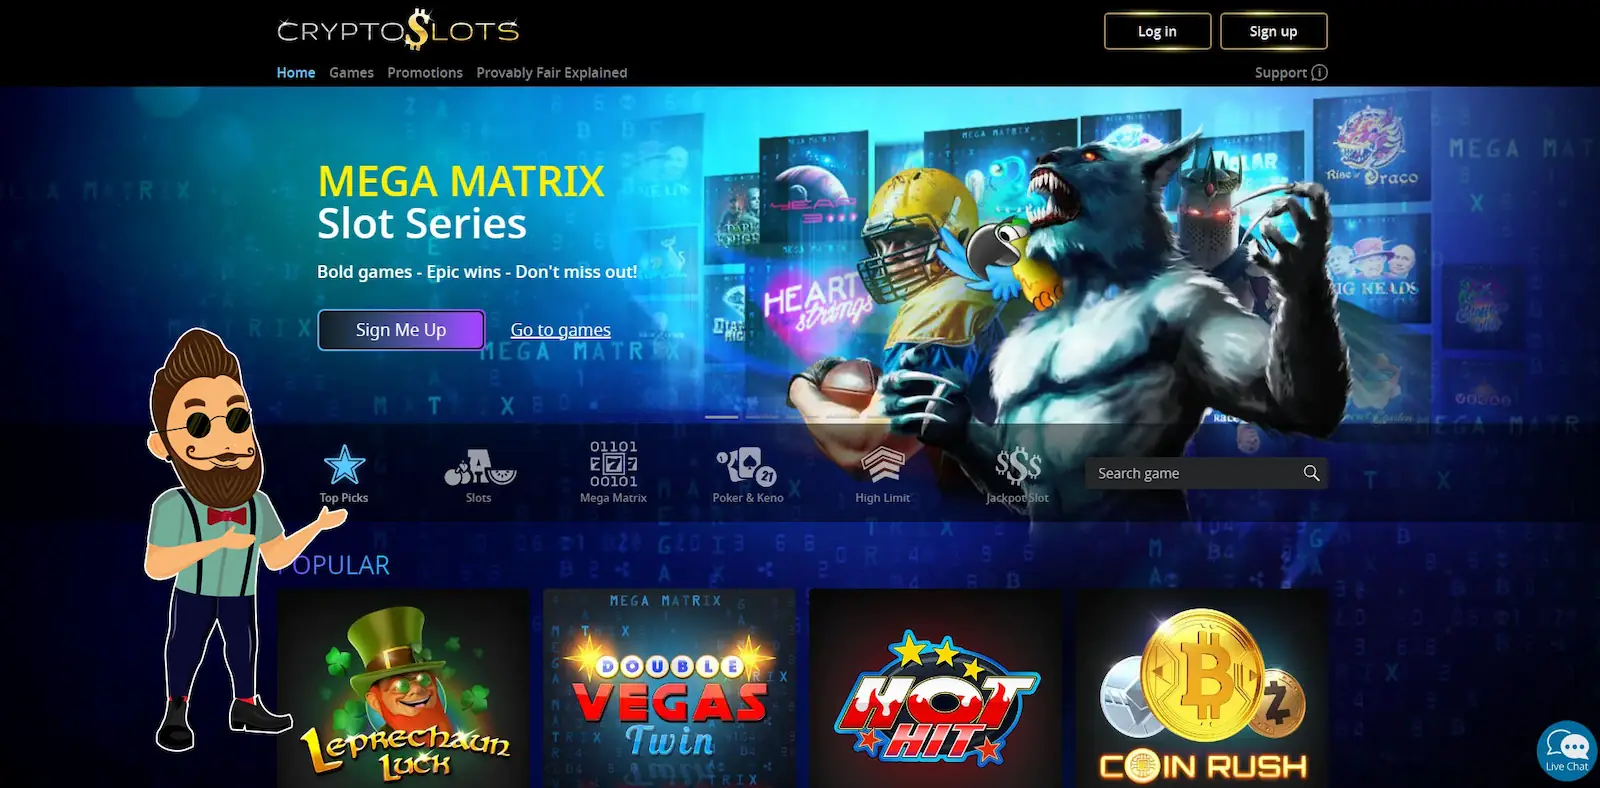 Review Of Cryptoslots Casino